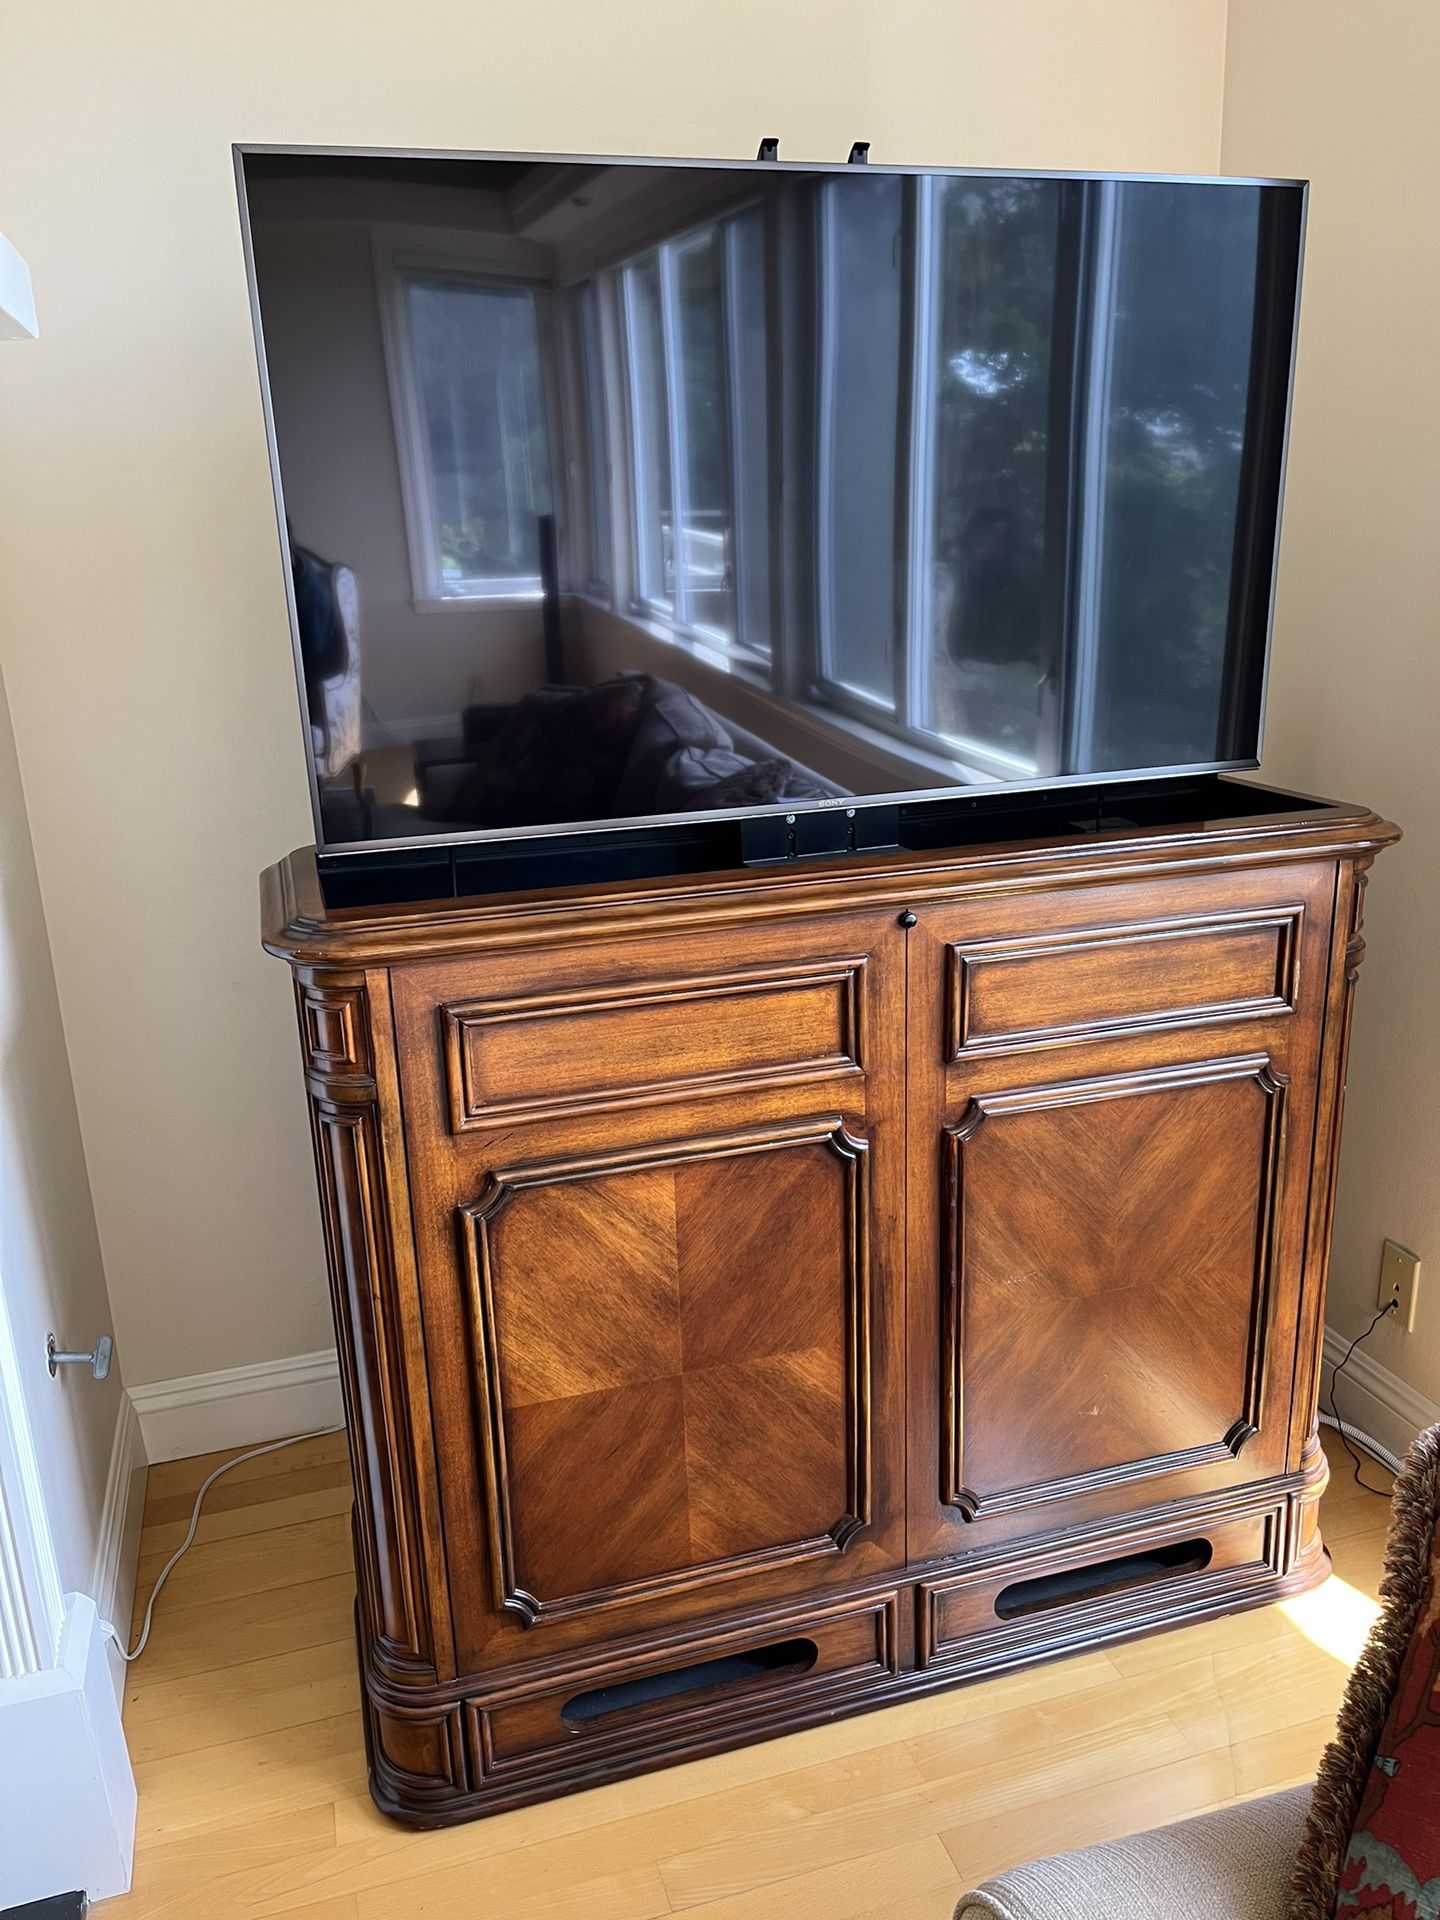 Estancia TV lift console Cabinet Inlay SONY SMART TV hooked up inside